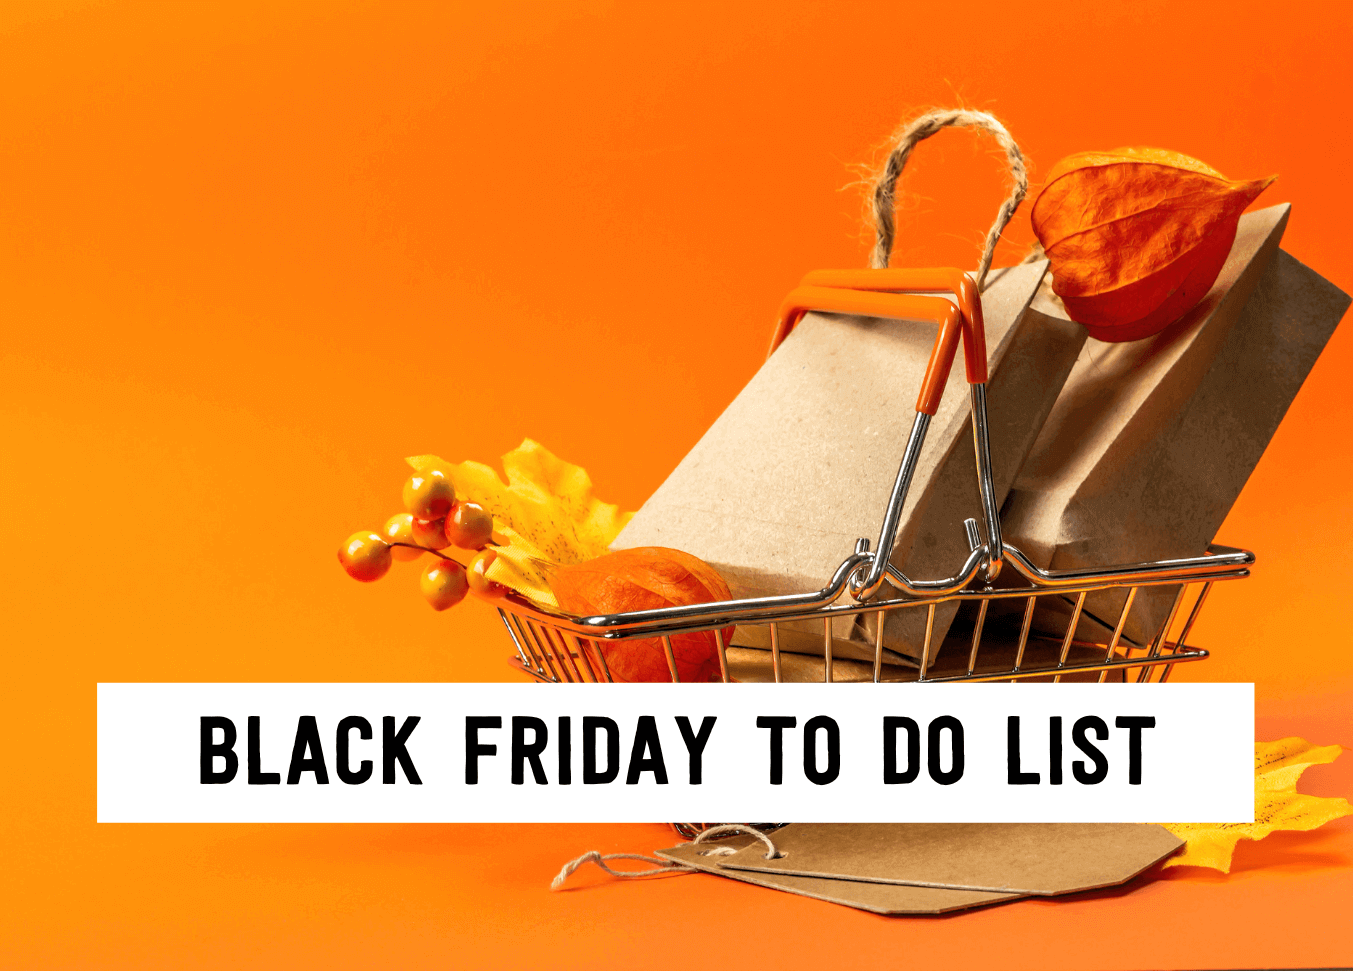 Black friday to do list | Tizzit.co - start and grow a successful handmade business